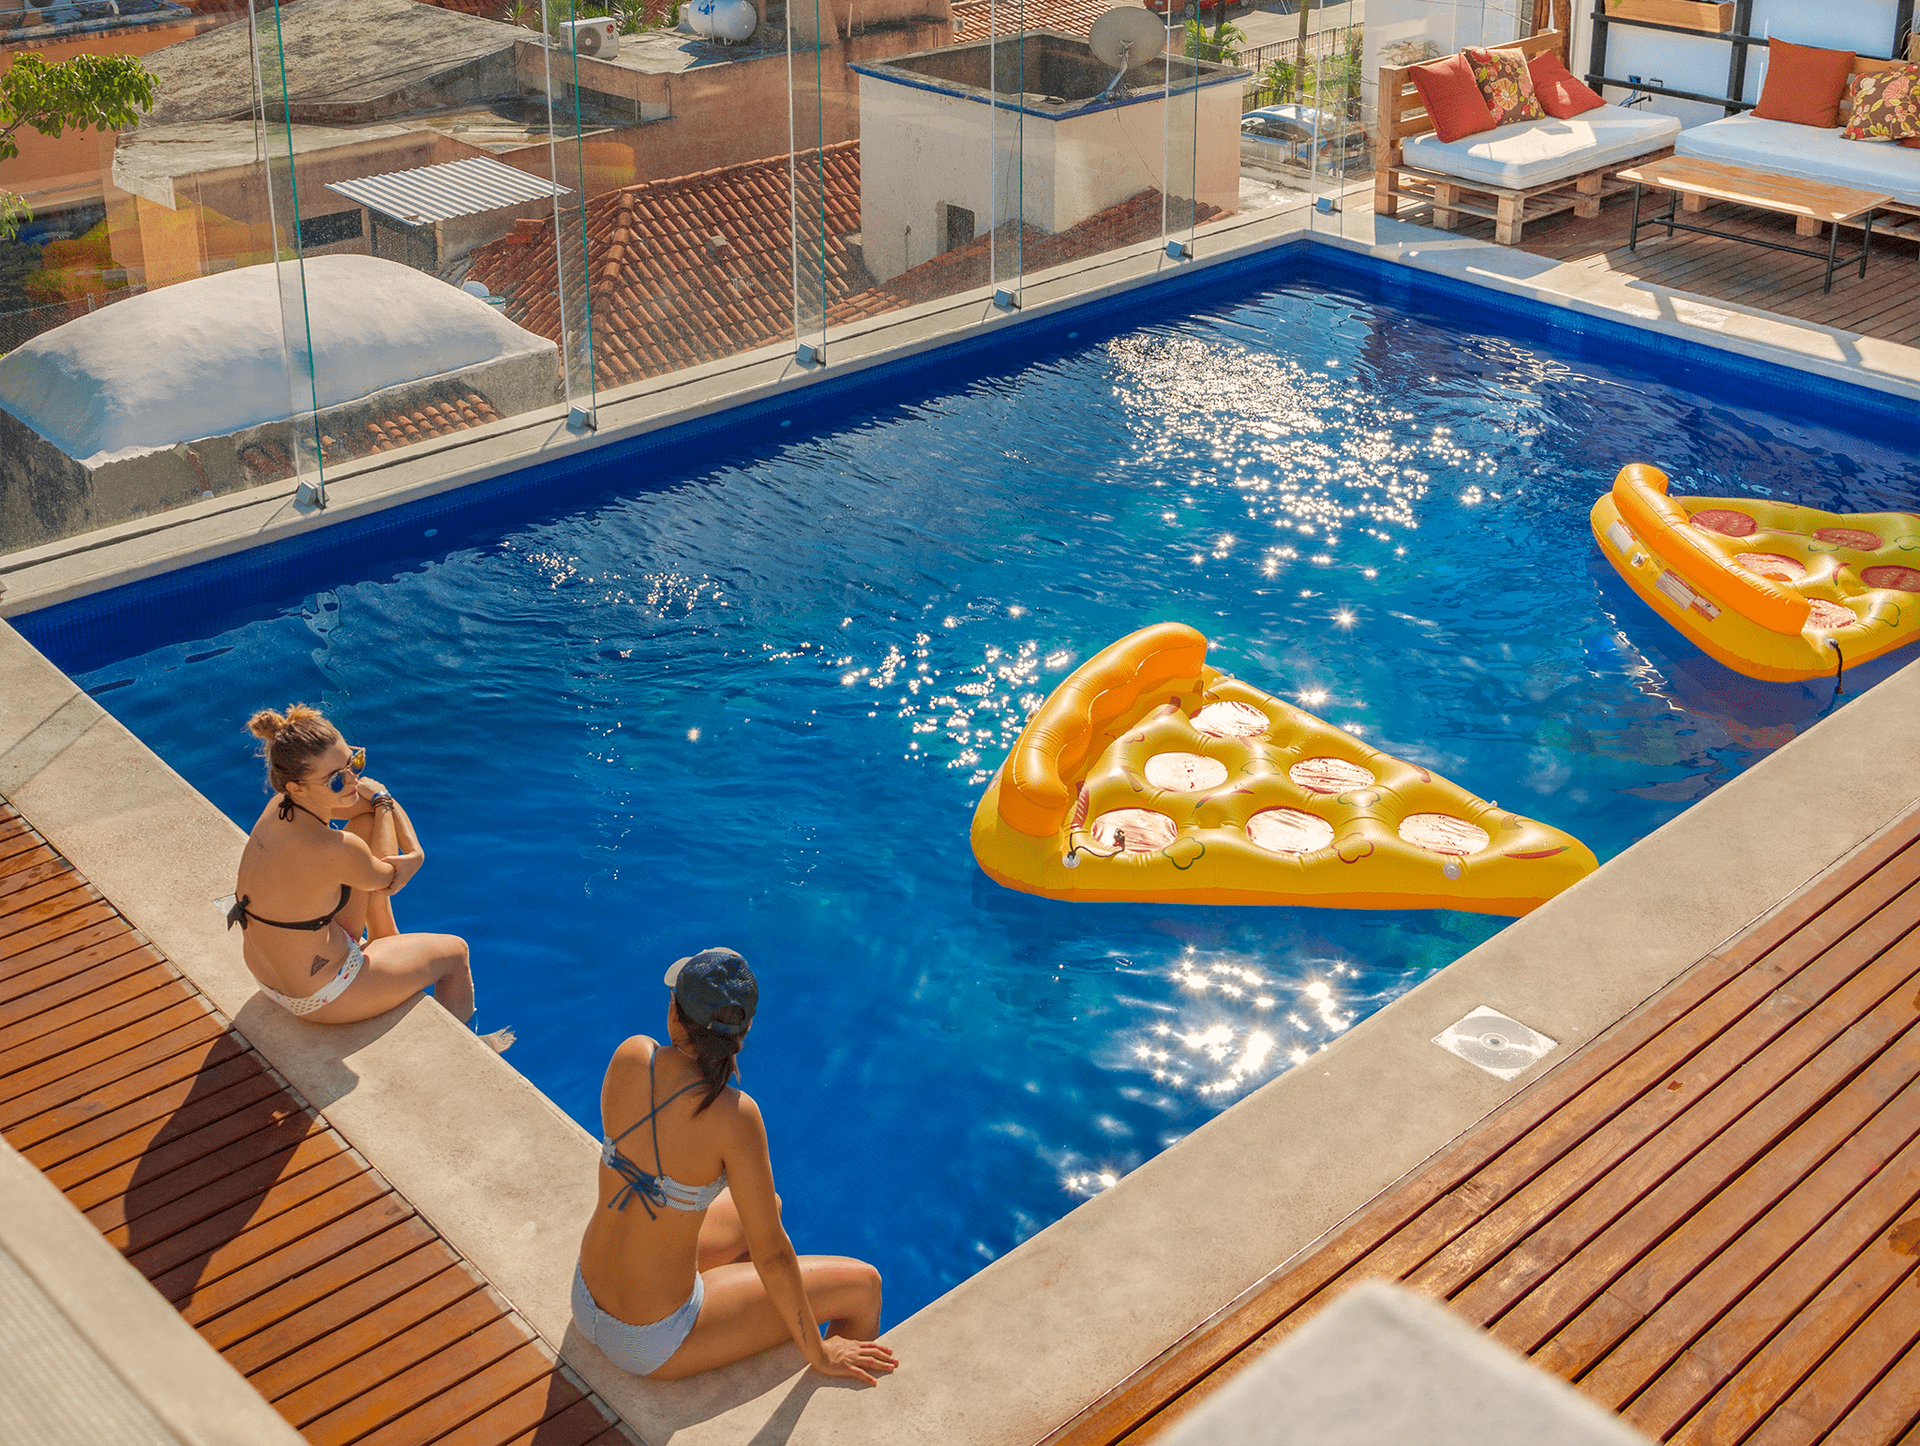 Two women are sitting on the edge of a swimming pool with a pizza float in the water.